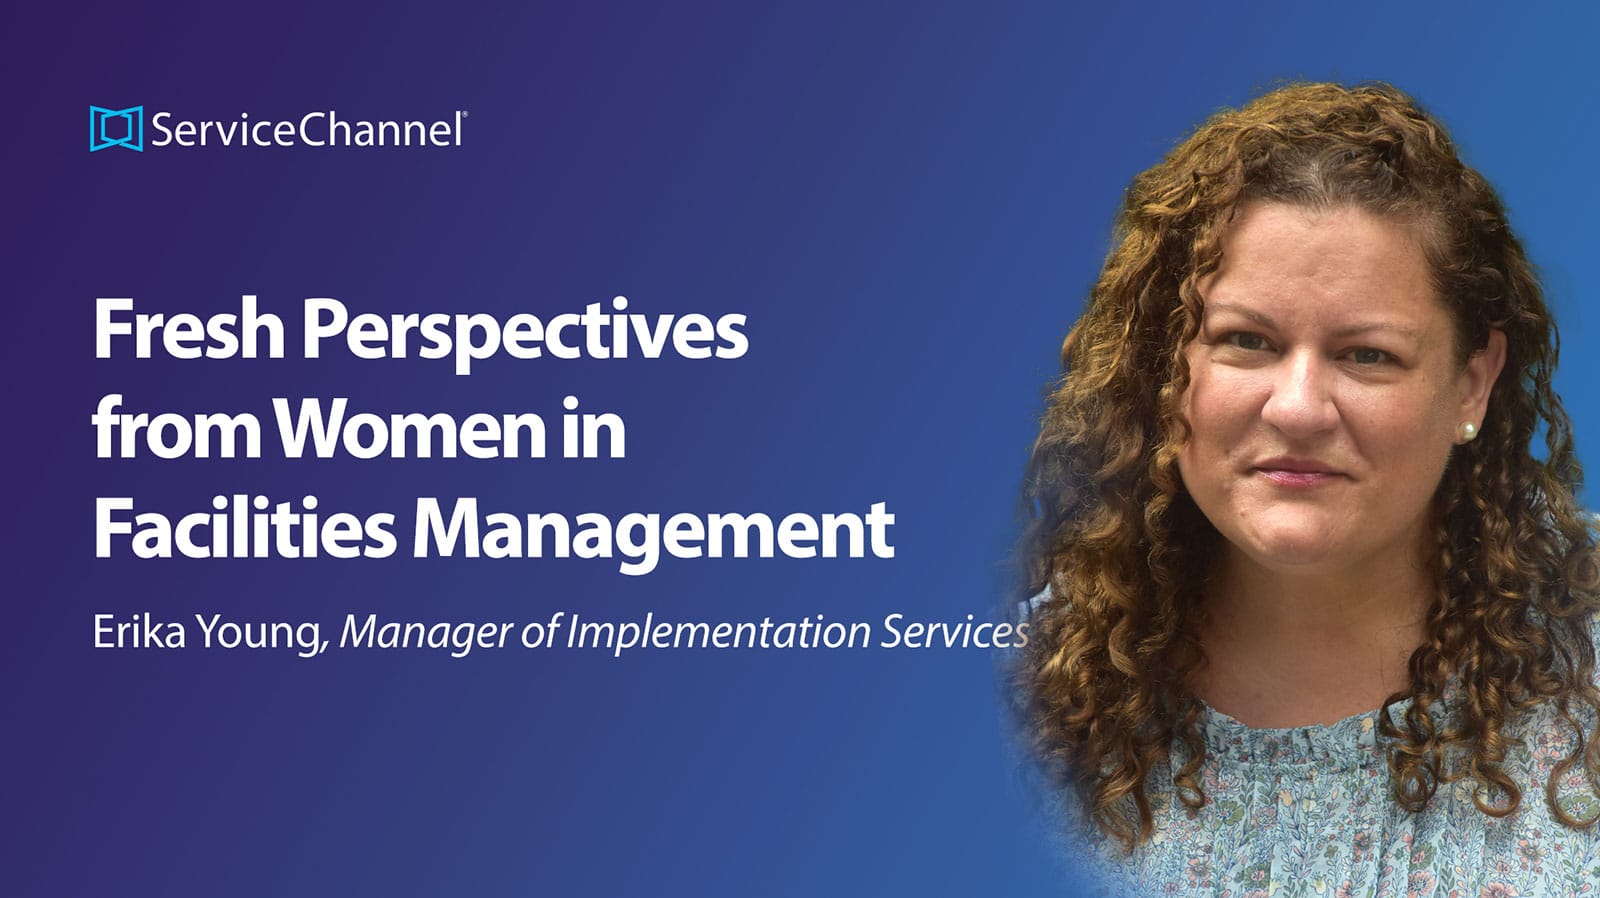 Fresh Perspectives from Women in Facilities Management, Erika Young, Manager of Implementation Services